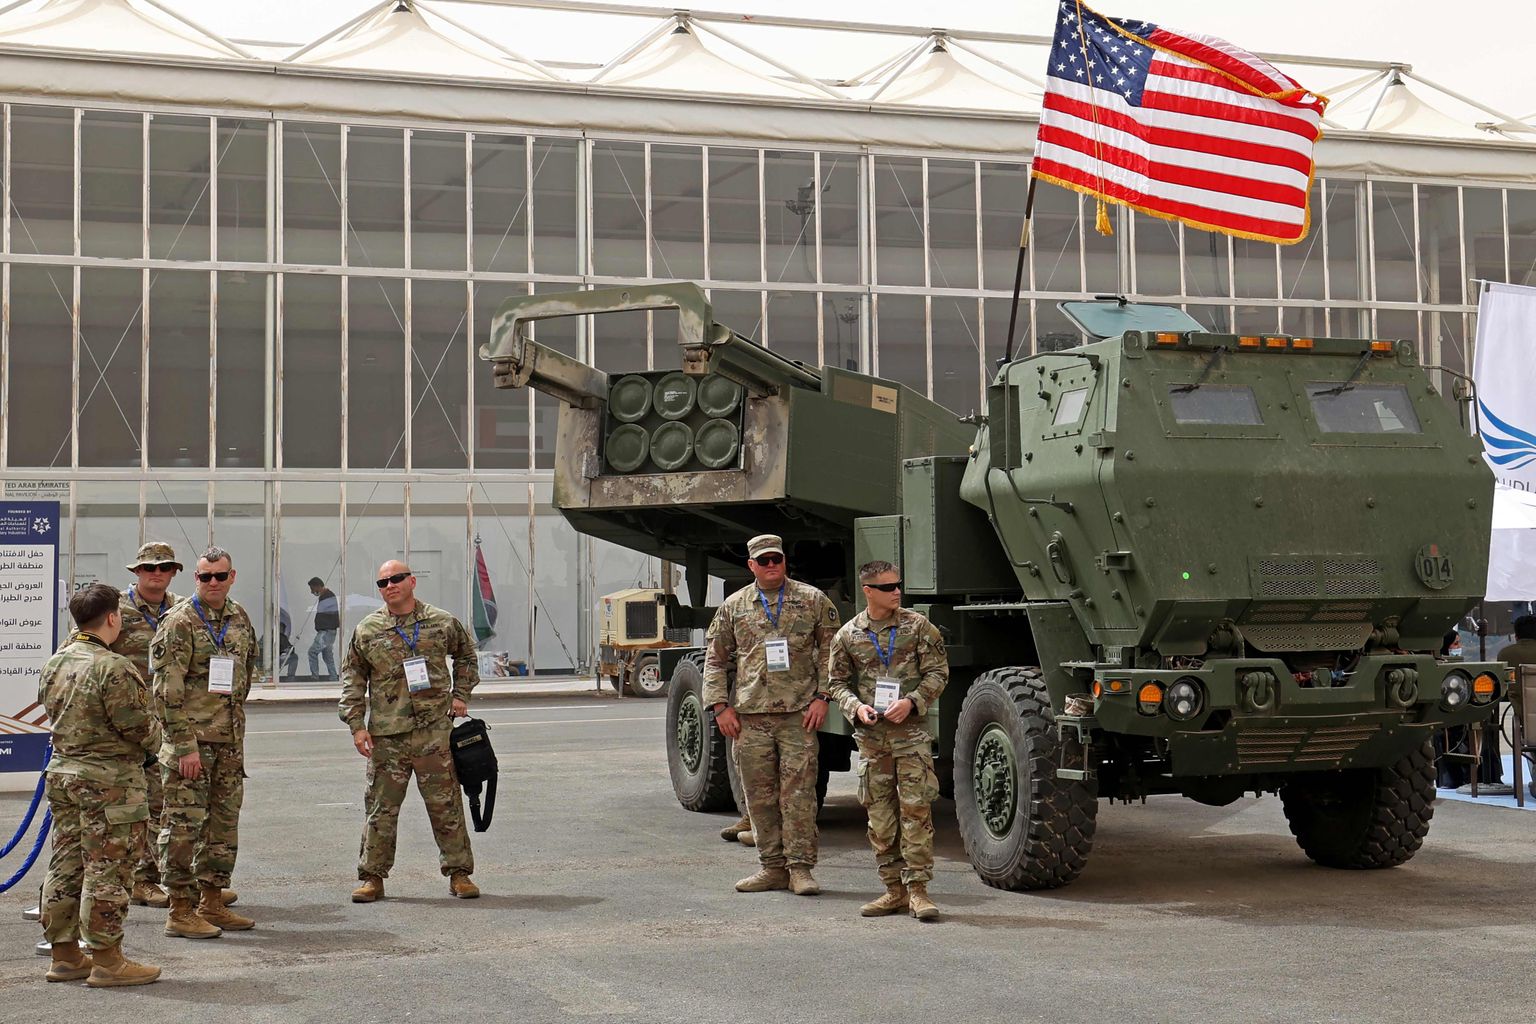 US military personnel stand by a M142 High Mobility Artillery Rocket System (HIMARS).